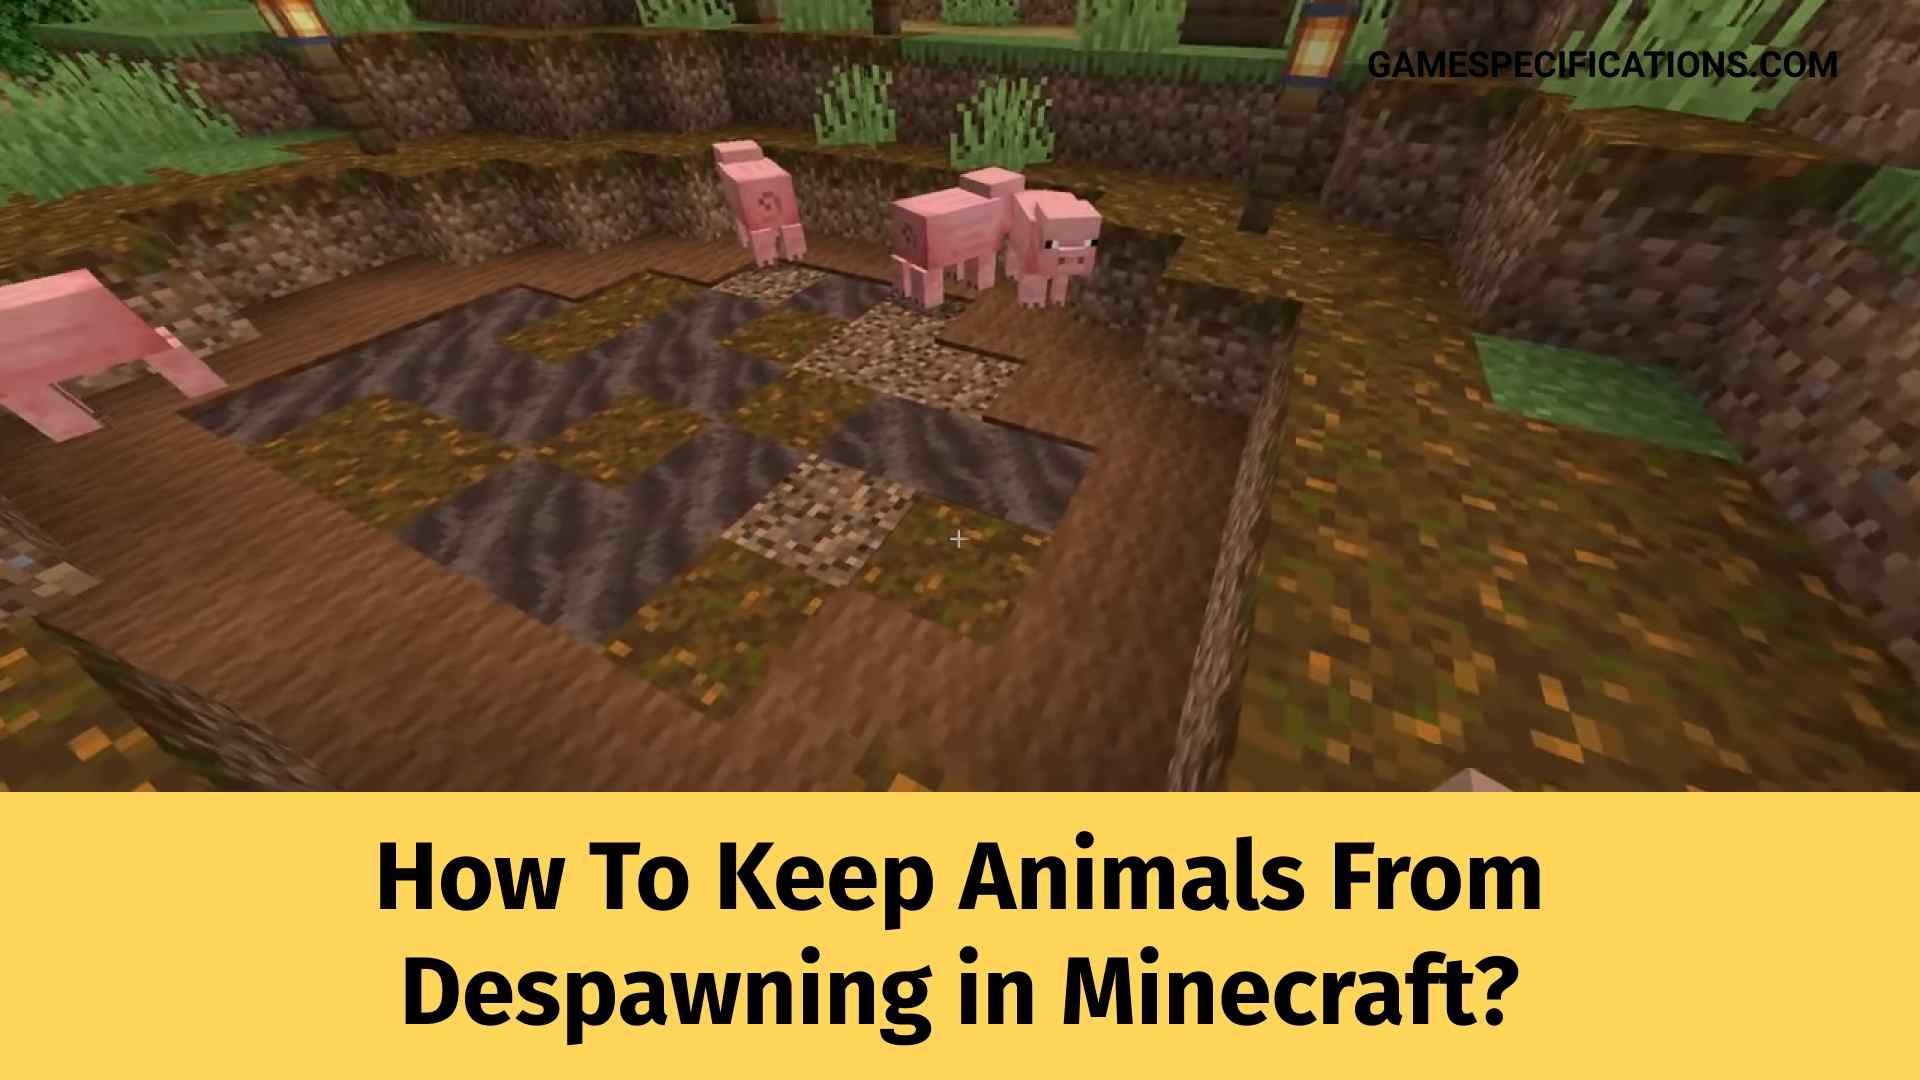 How To Keep Animals From Despawning In Minecraft? - Game Specifications